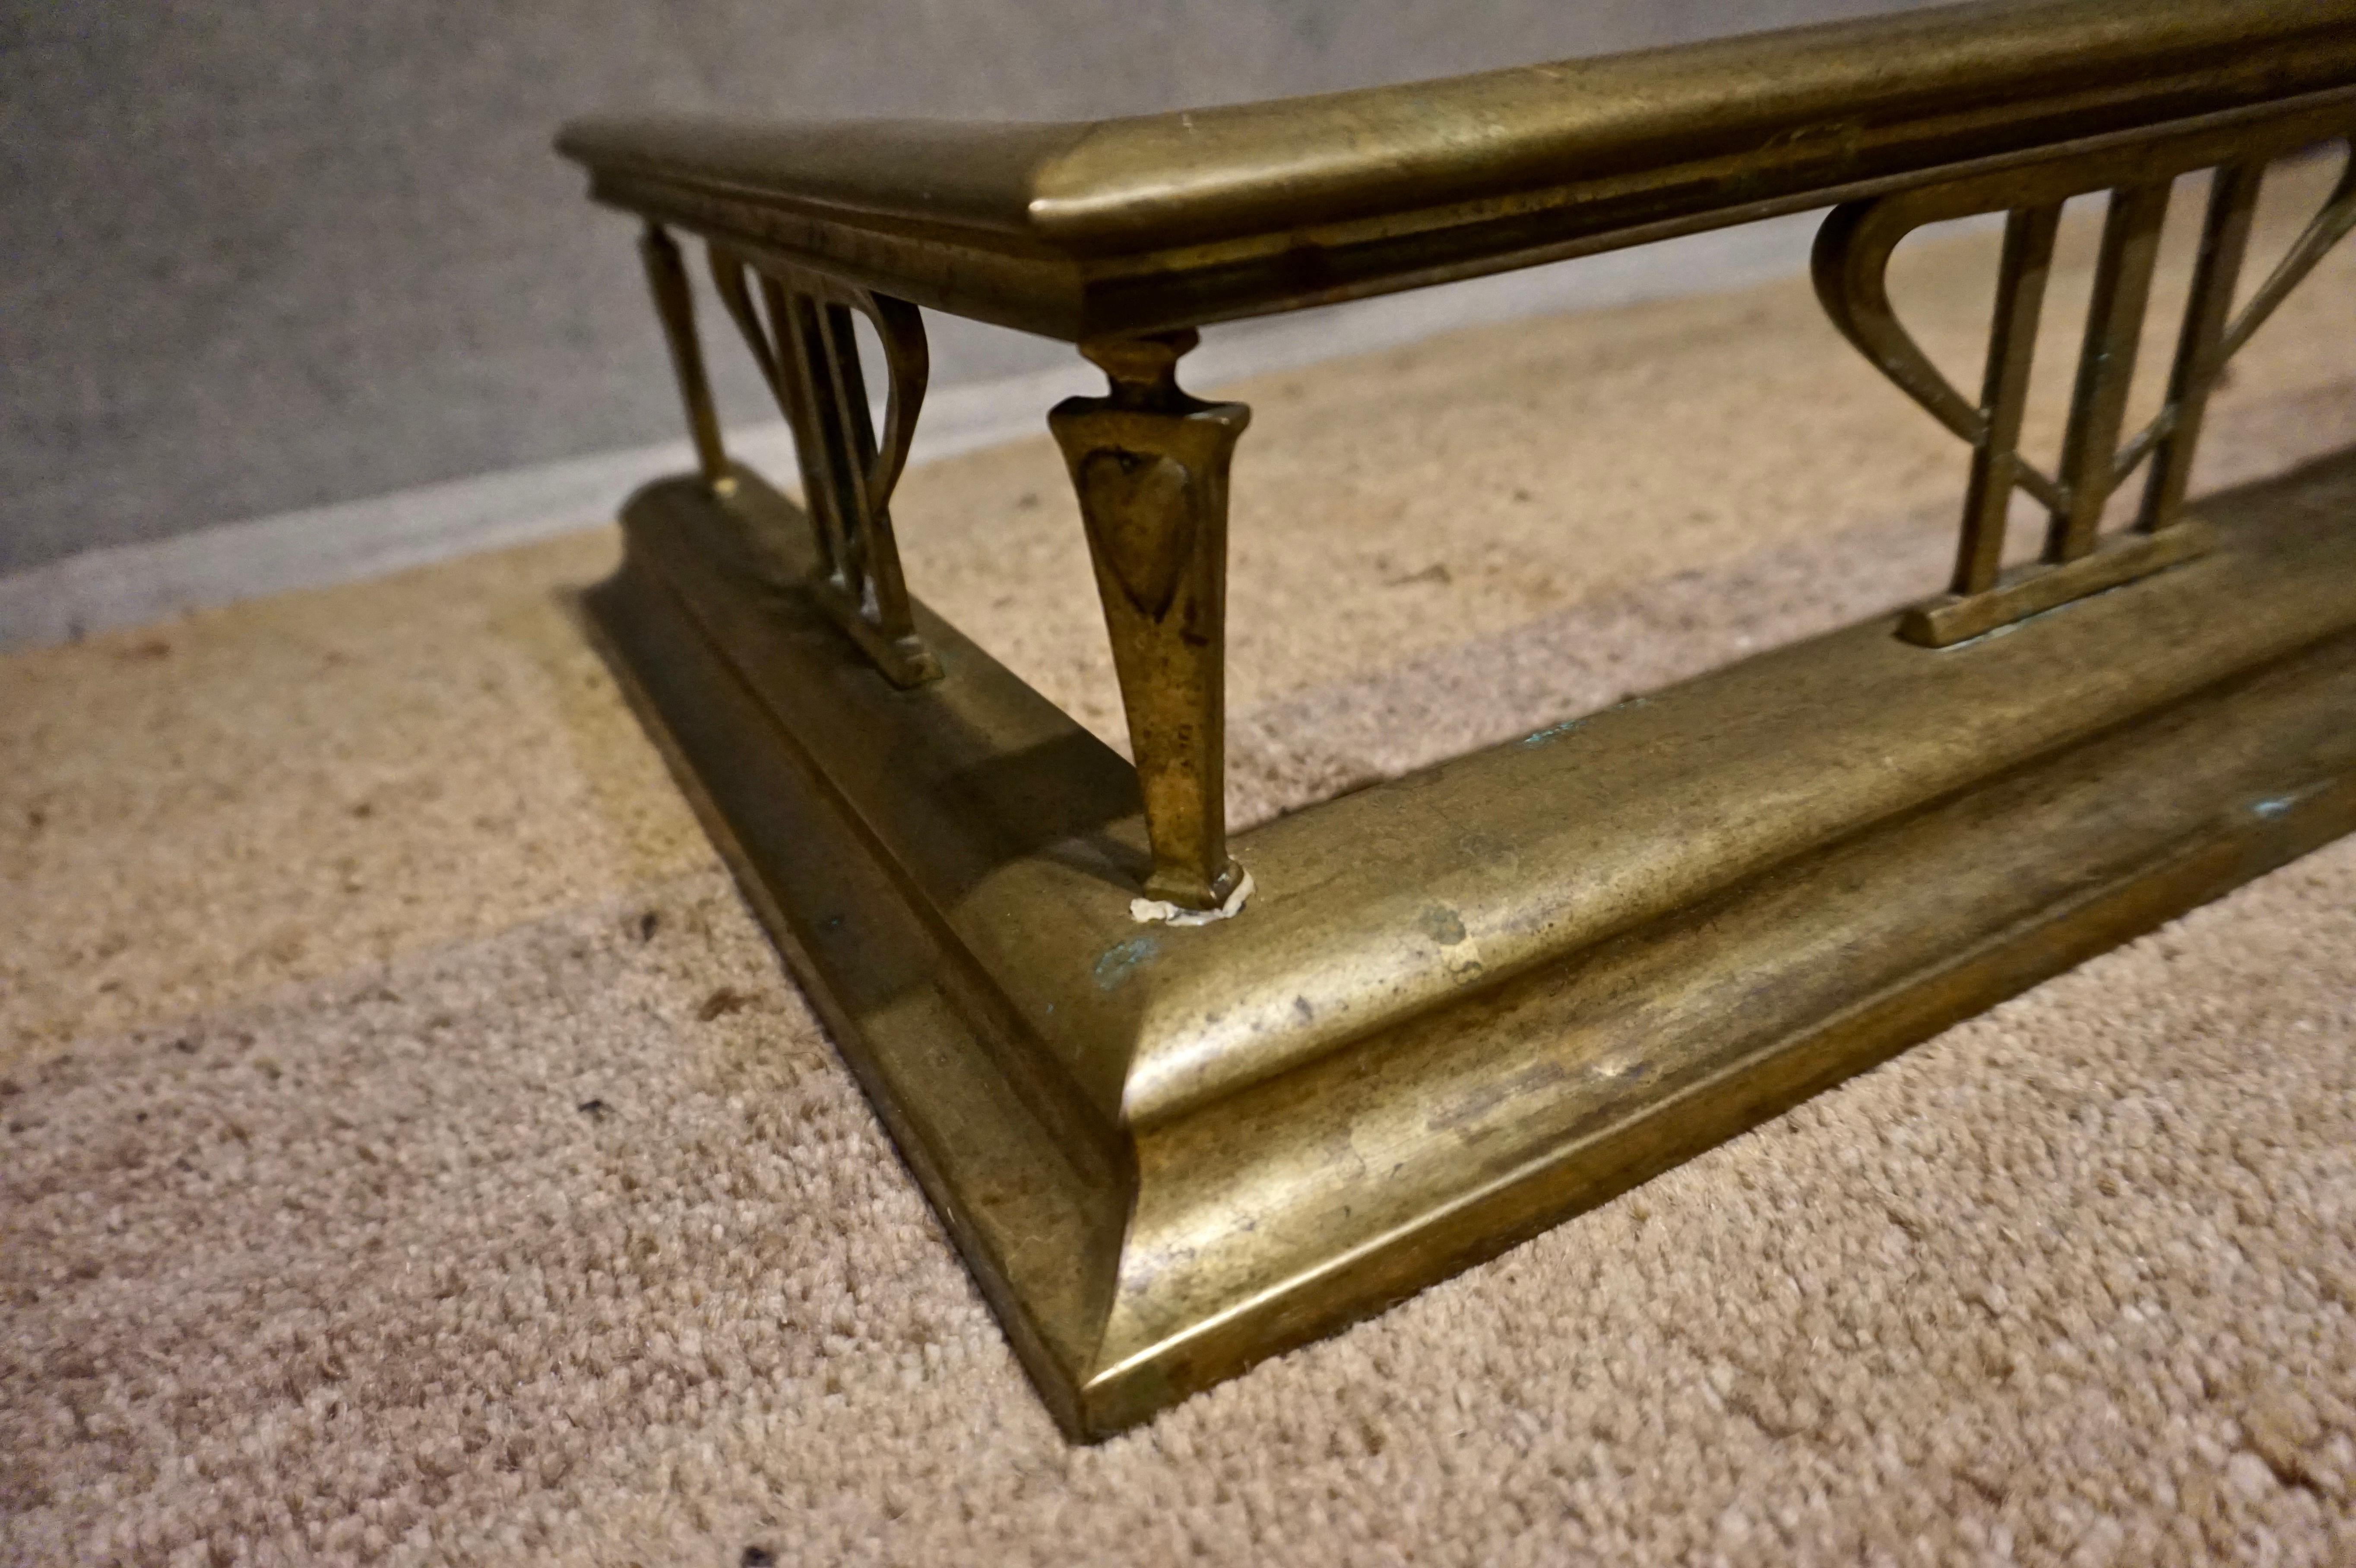 Art Nouveau Brass Fireplace Fender Surround Original Patina In Good Condition For Sale In Vancouver, British Columbia